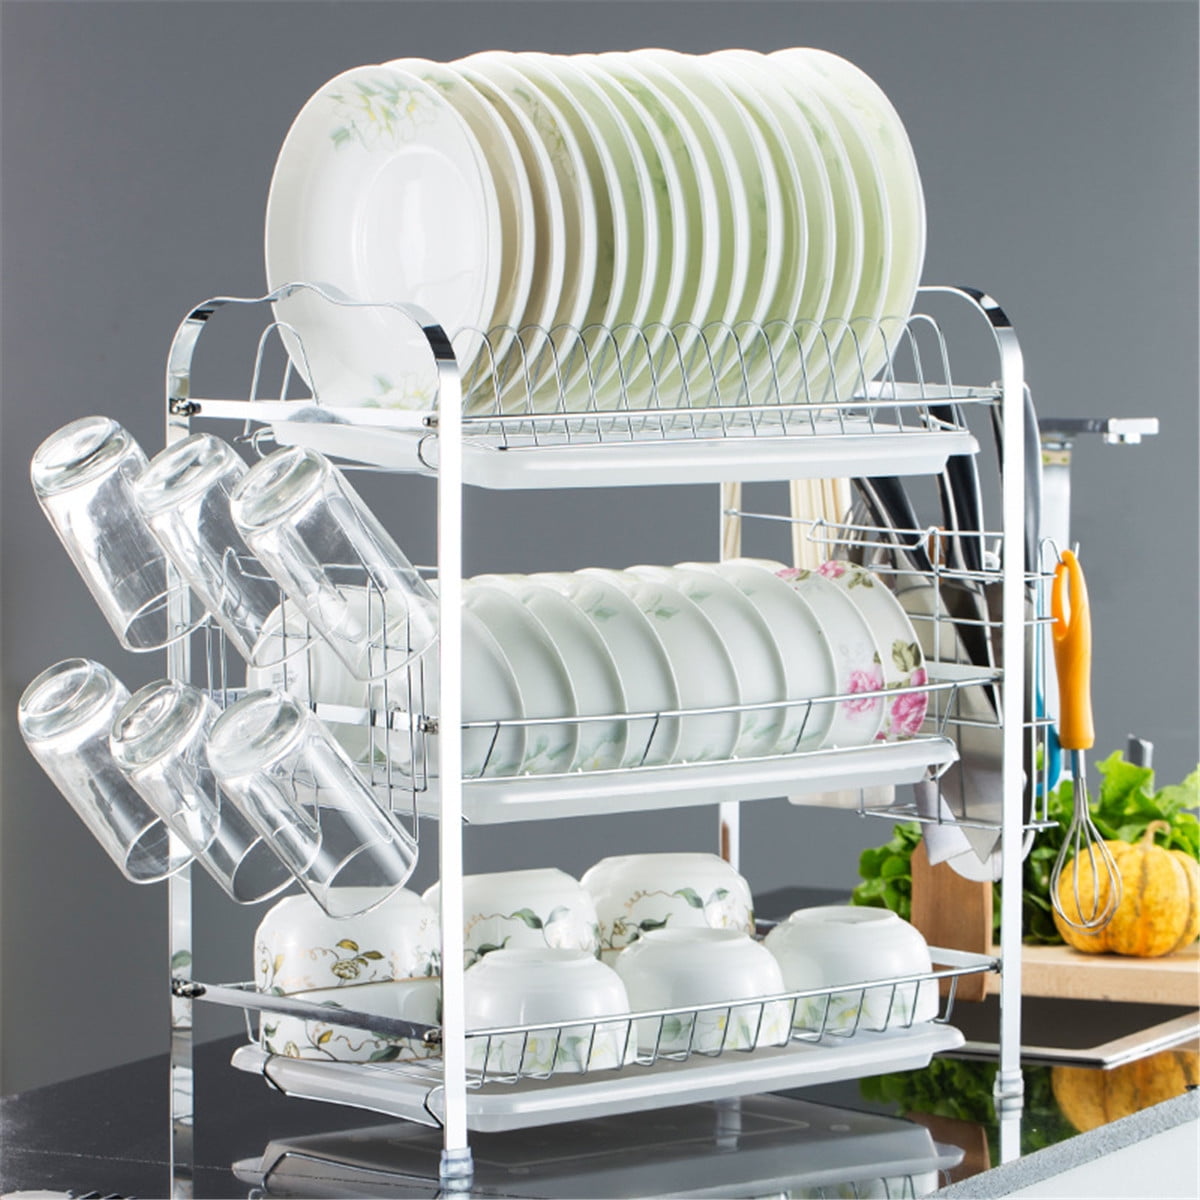 Wall Mounted Dish Drainer, Hanging Kitchen Dish Drying Rack, Modern Design  Large Capacity 2 Tier Dish Rack Made of Durable Stainless Steel with